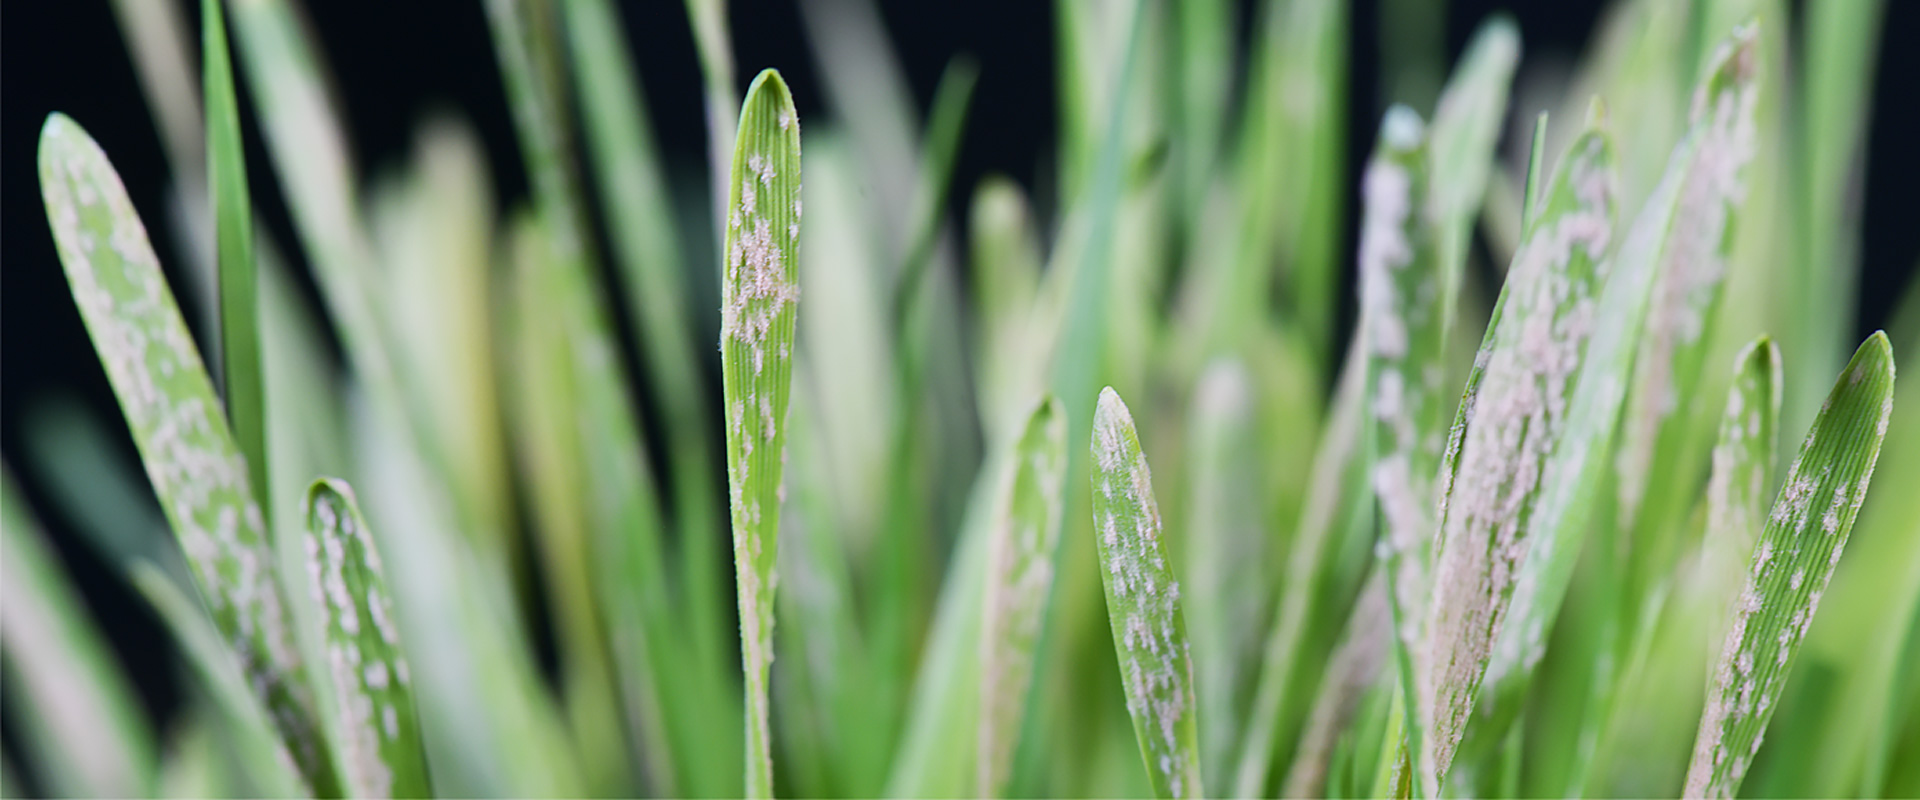 Scientists Leverage Multiplex Genome Editing to Create Disease-resistant Wheat